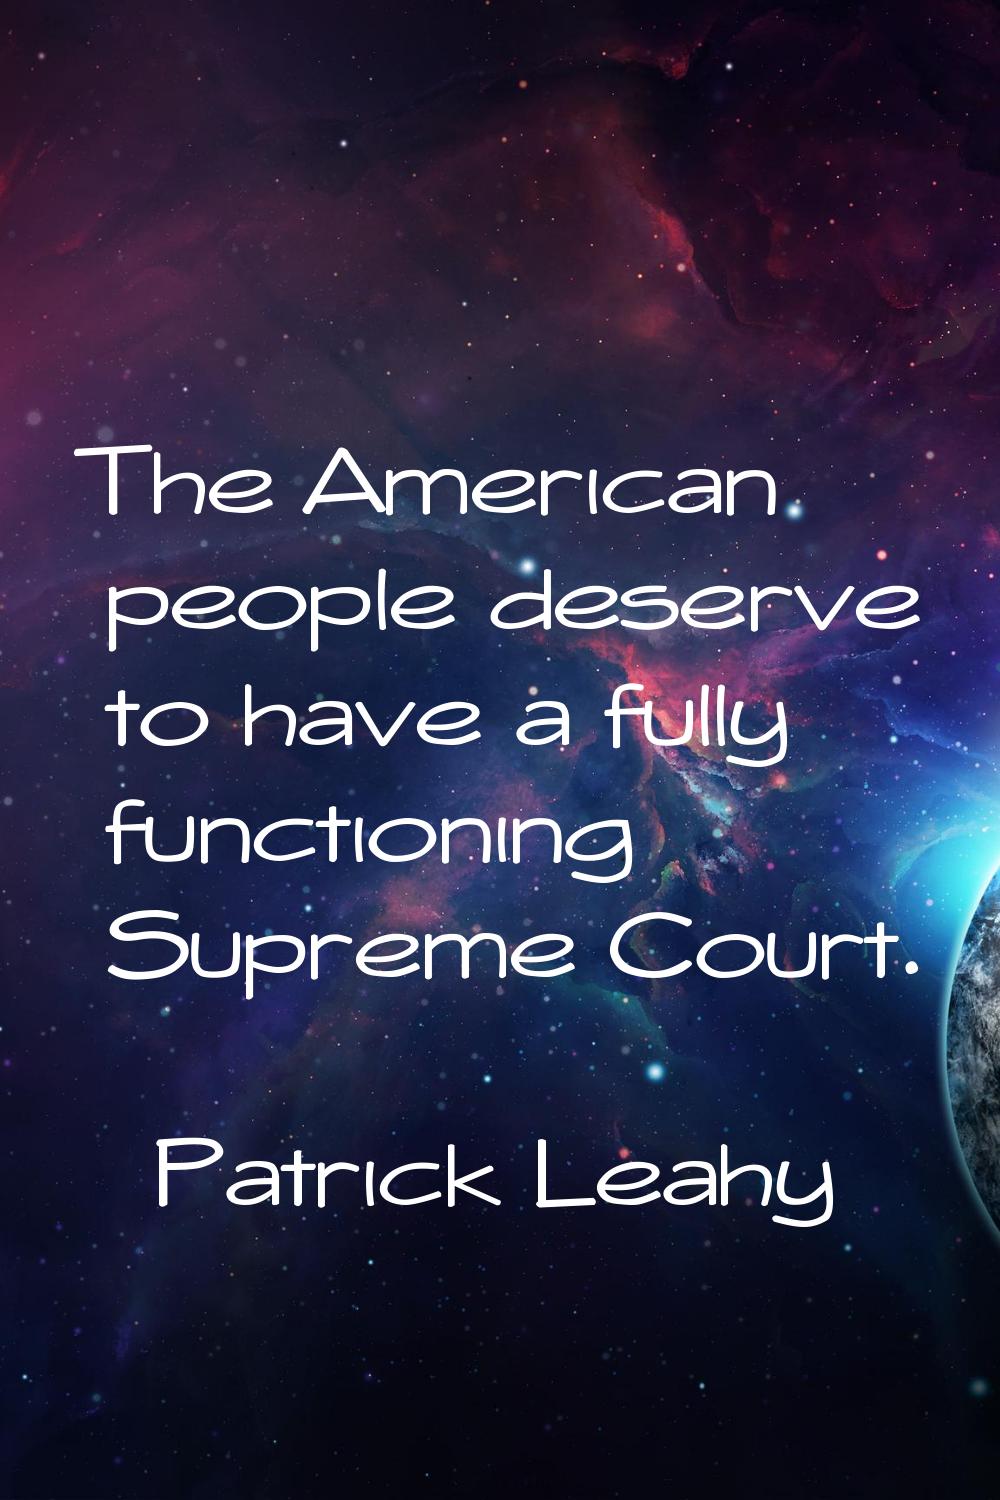 The American people deserve to have a fully functioning Supreme Court.